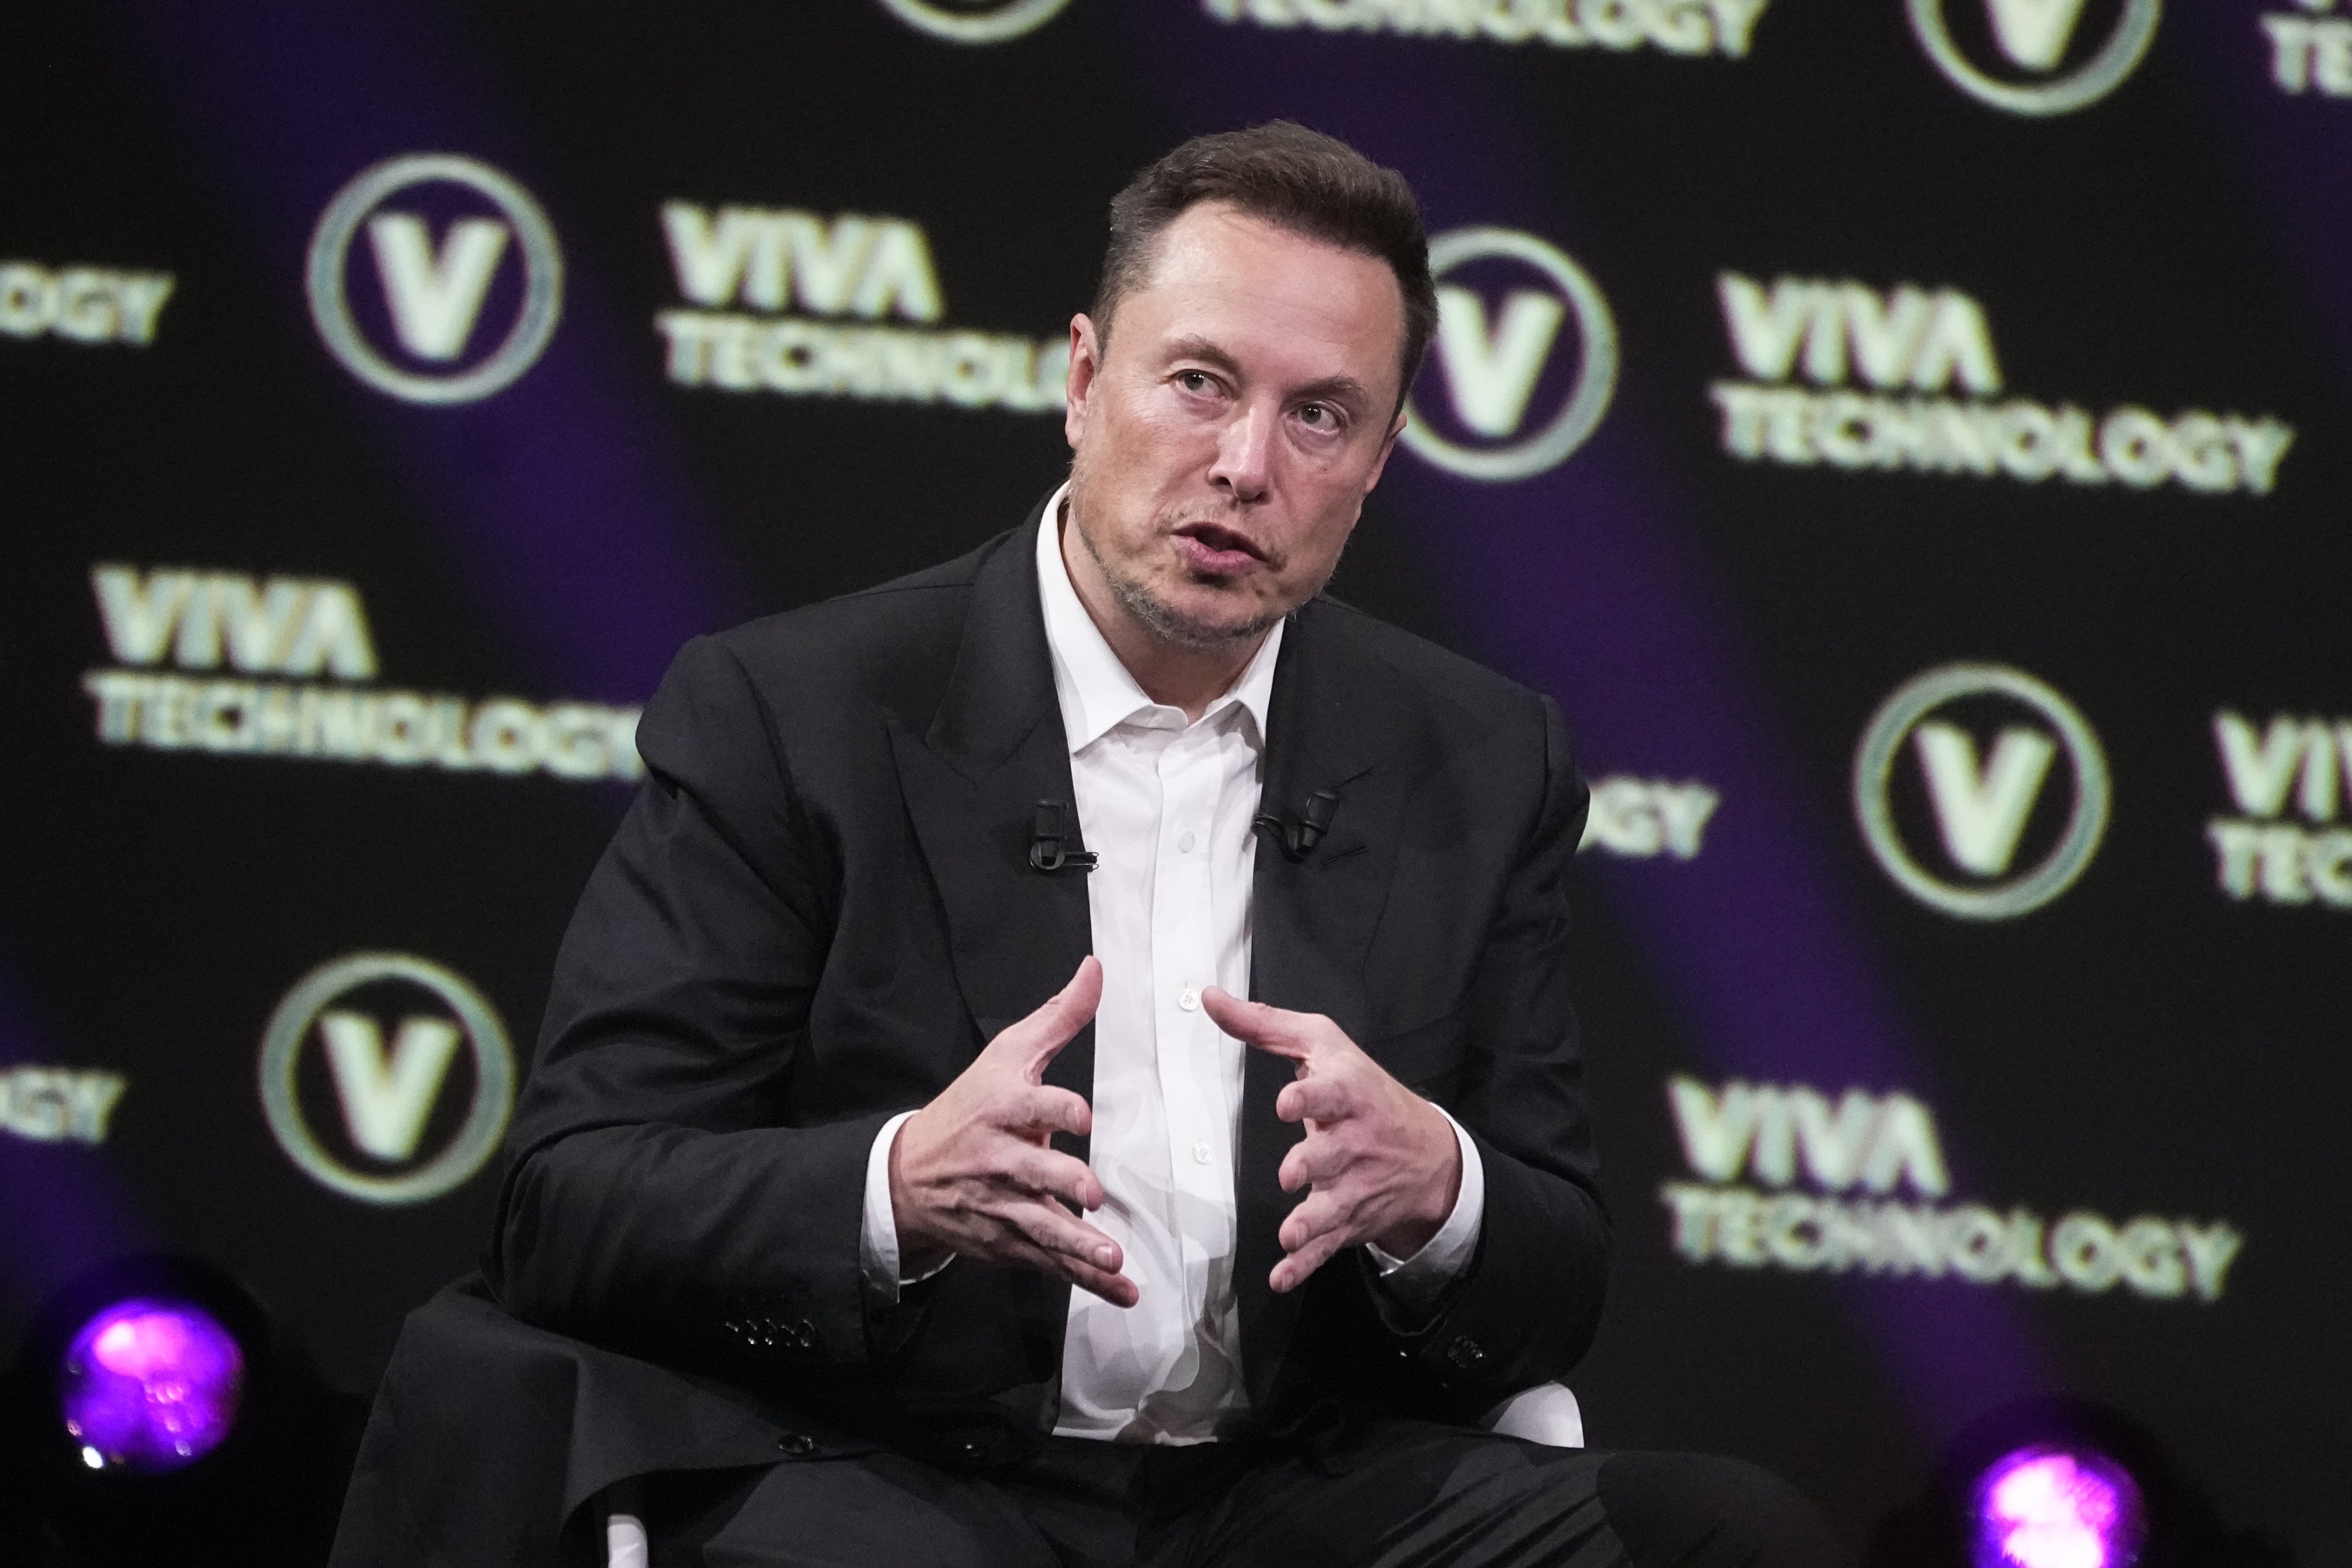 Eleven ways Elon Musk has changed Twitter since taking over